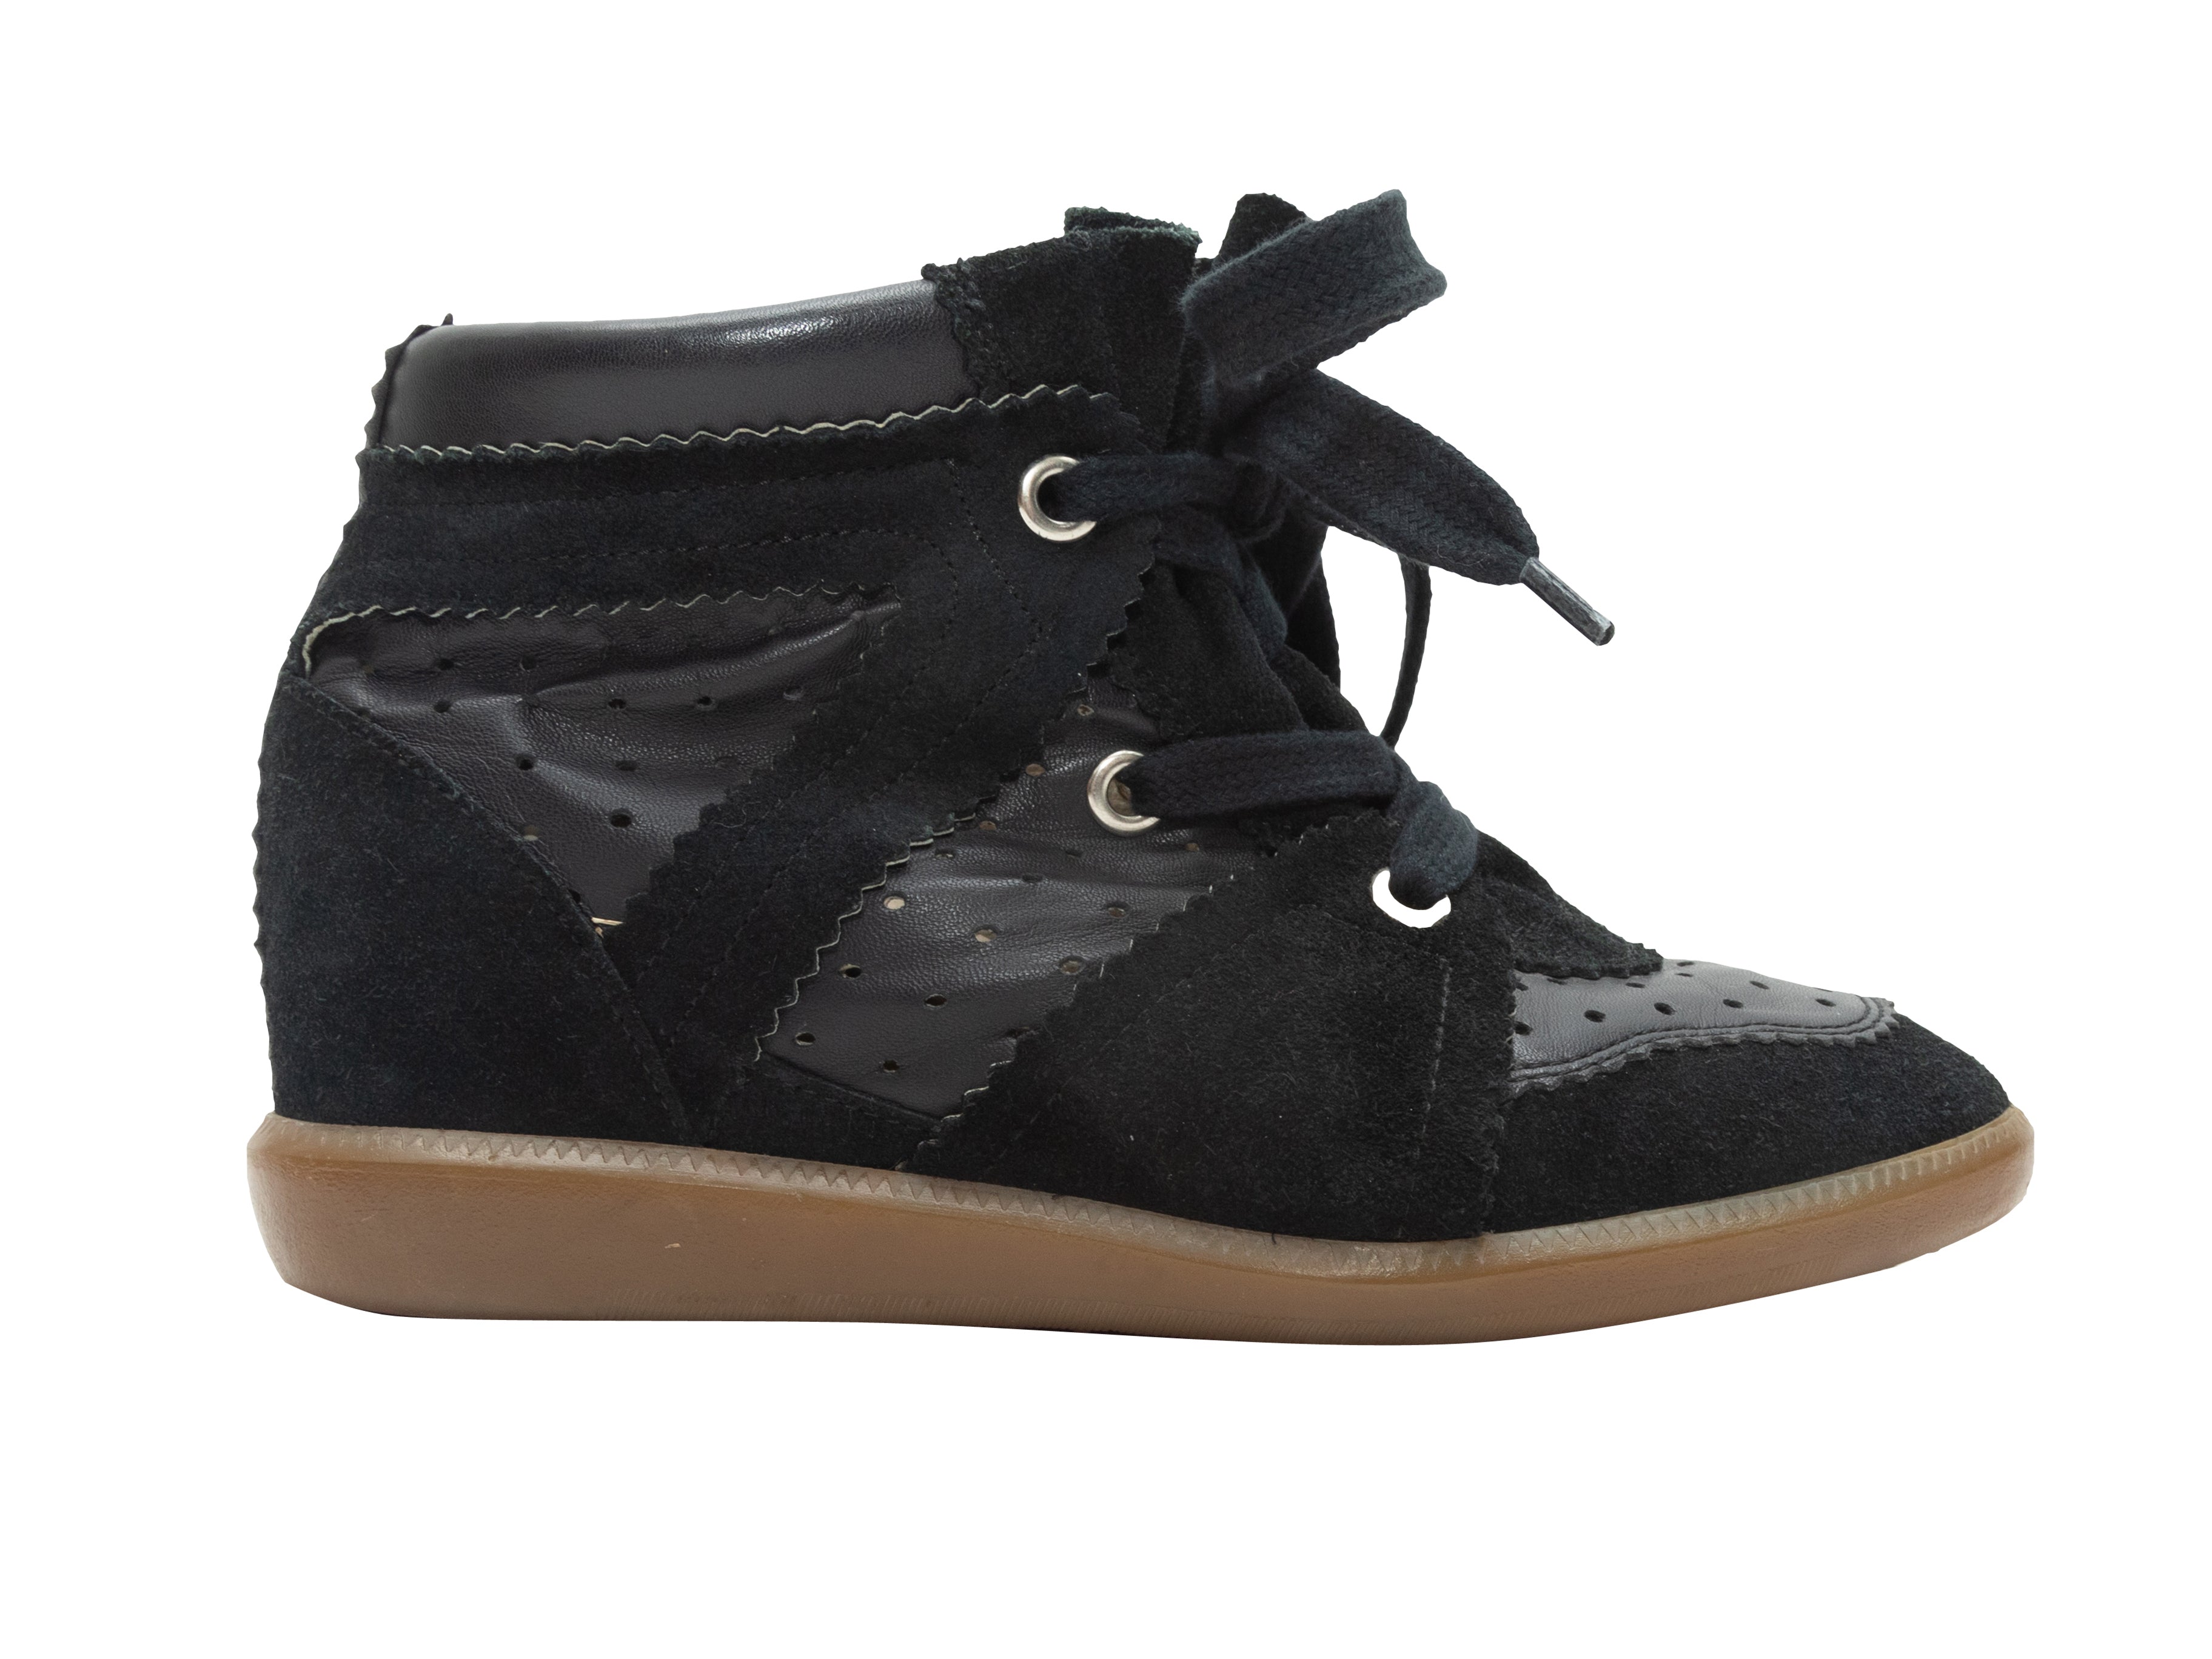 Black Marant Suede & Leather Sneakers – Revival